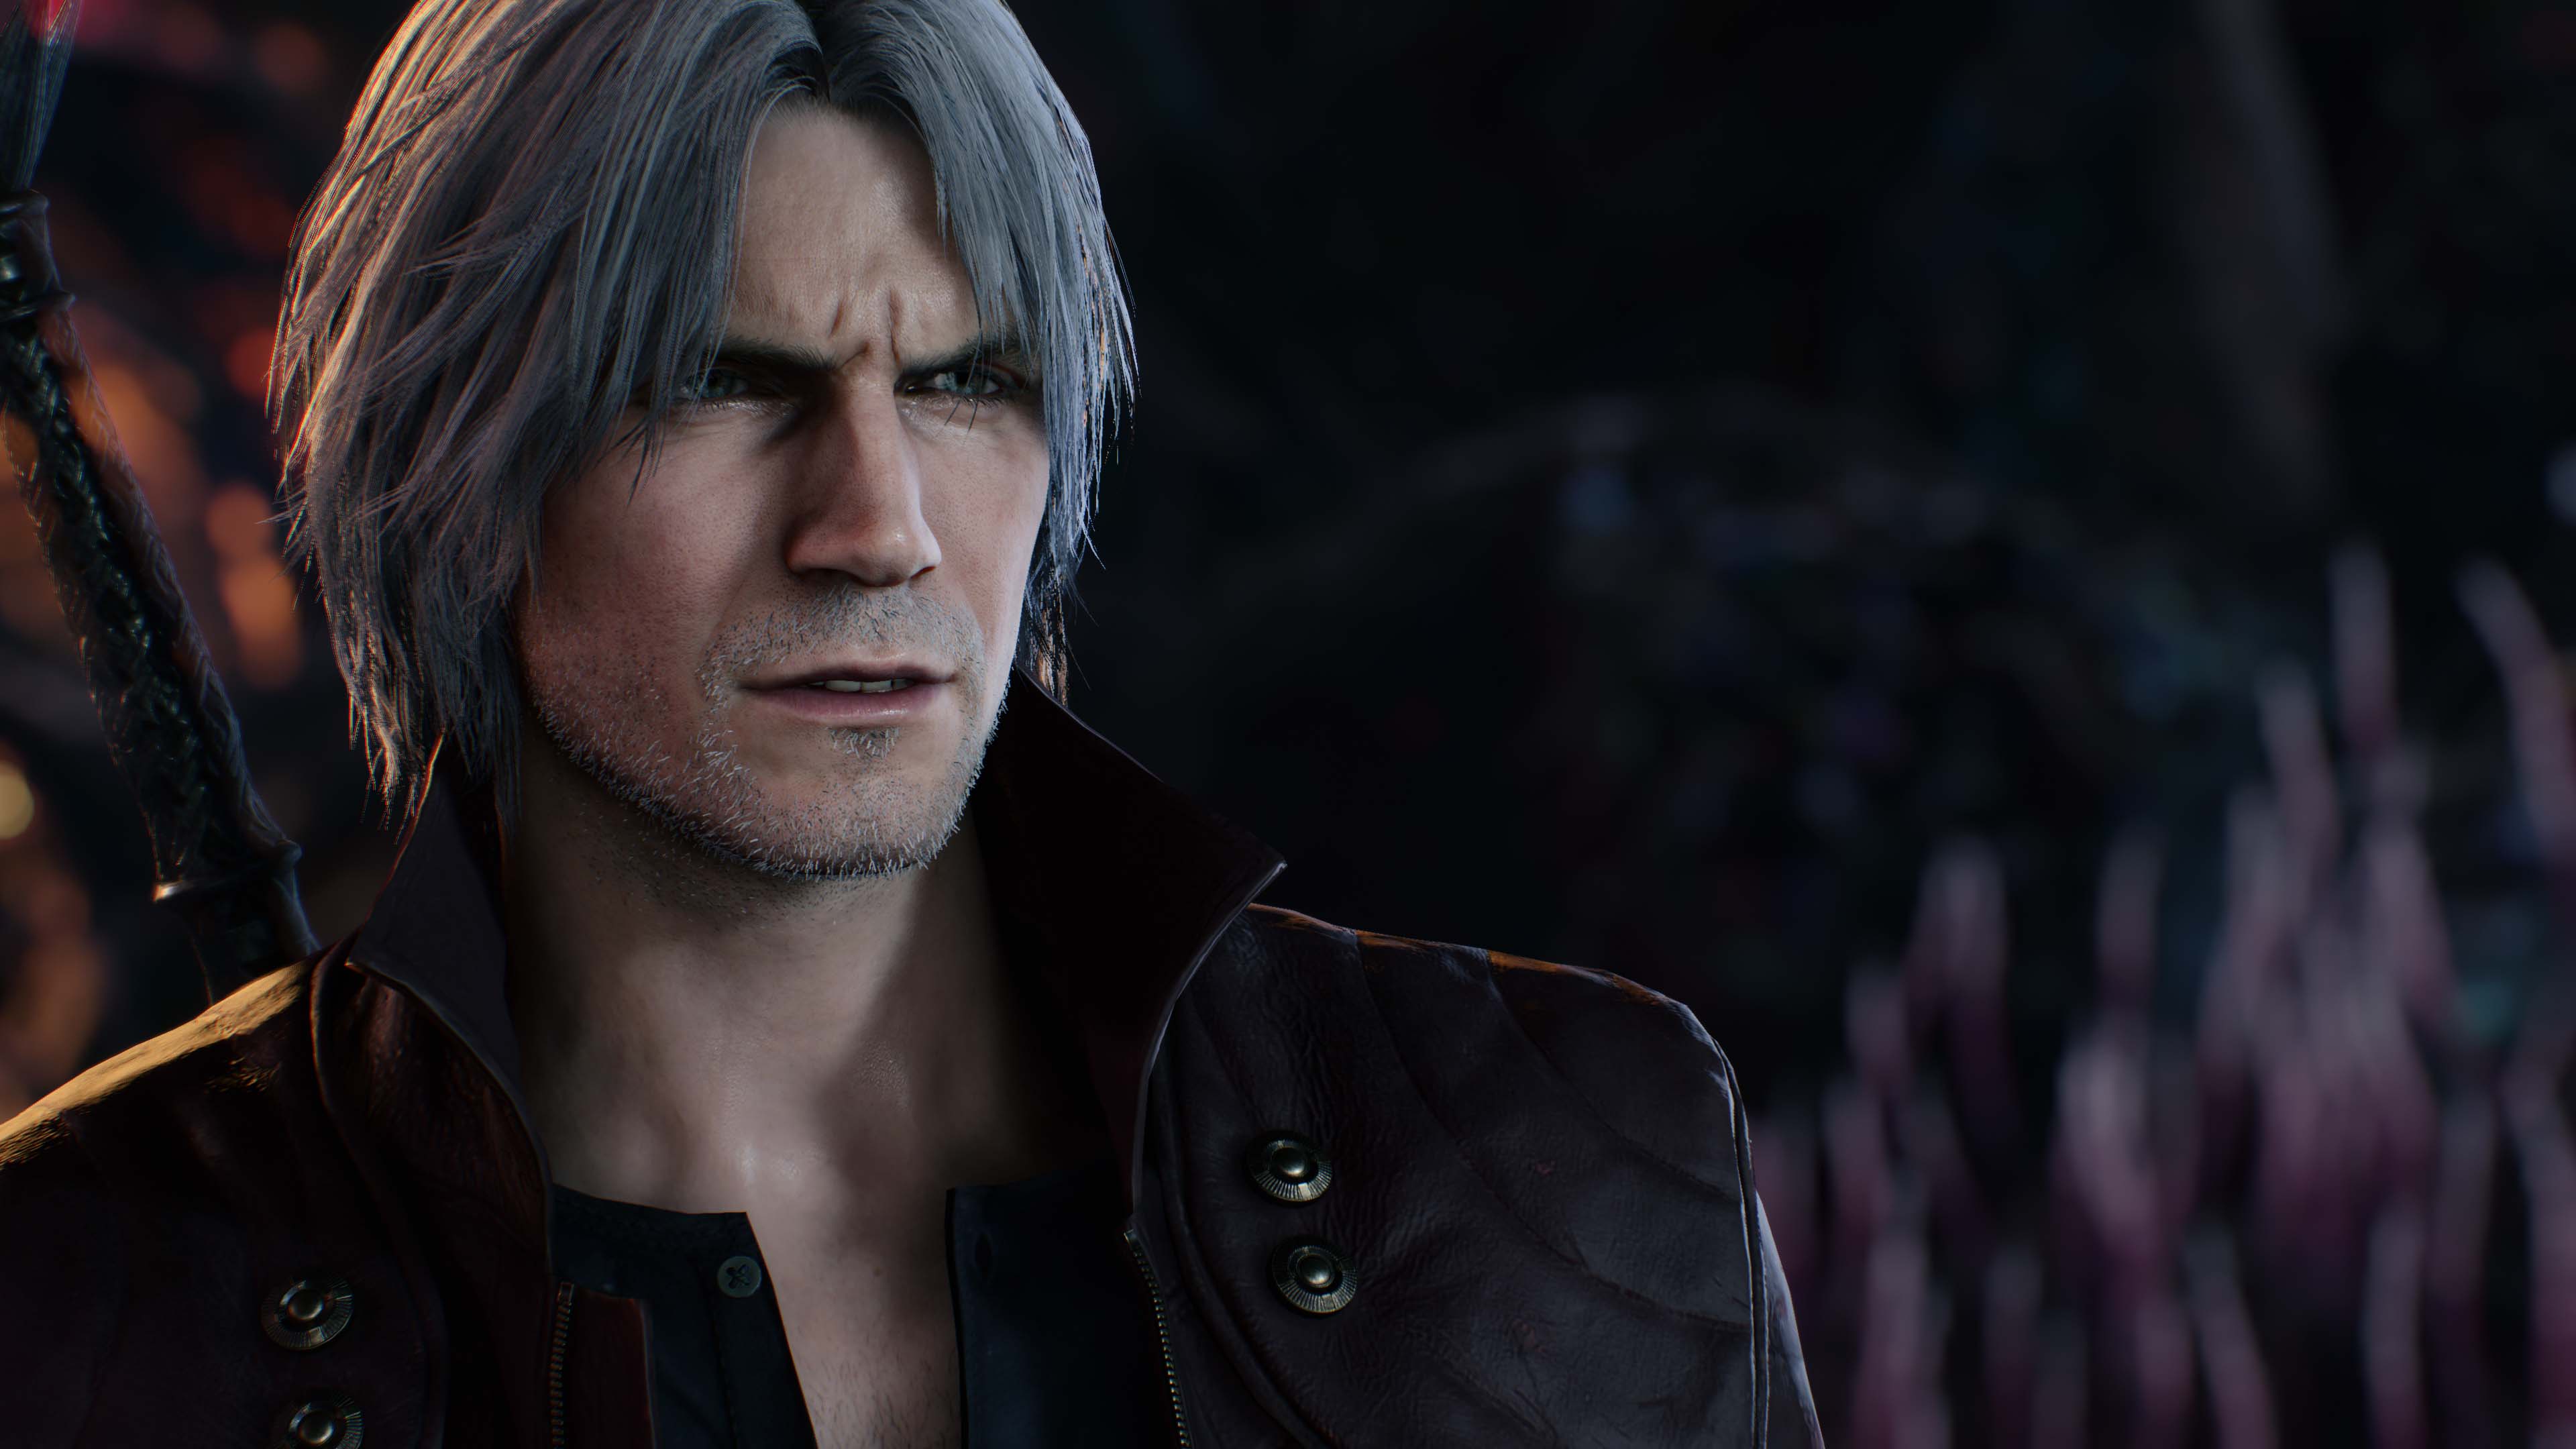 TGS 2018 Trailer, Screenshots, and Deluxe Edition Revealed for Devil May Cry 5